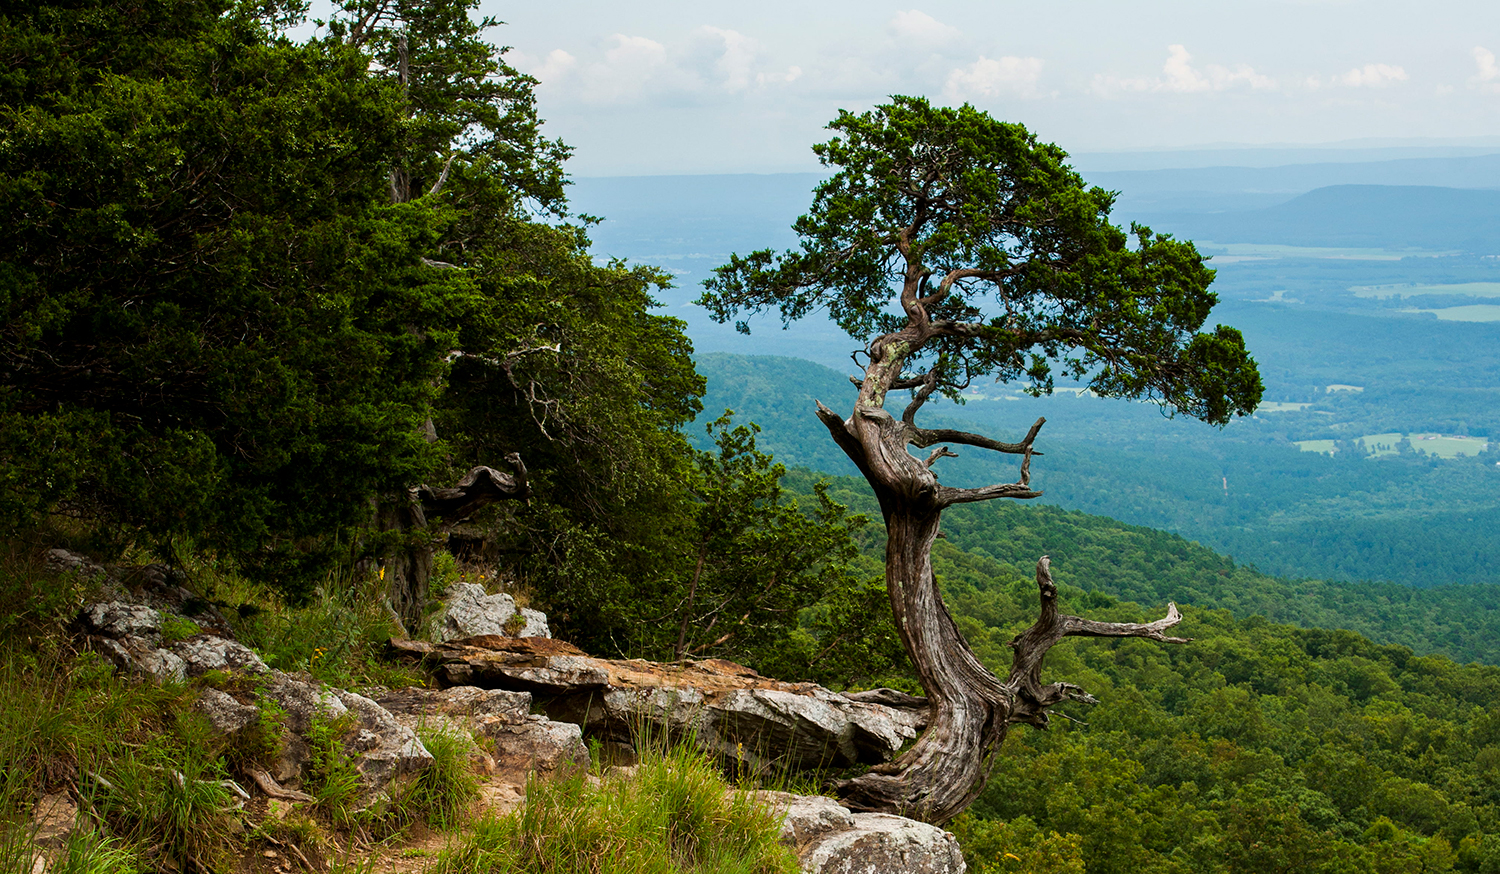 A tree on the edge of a forested bluff which looks over a green valley below.